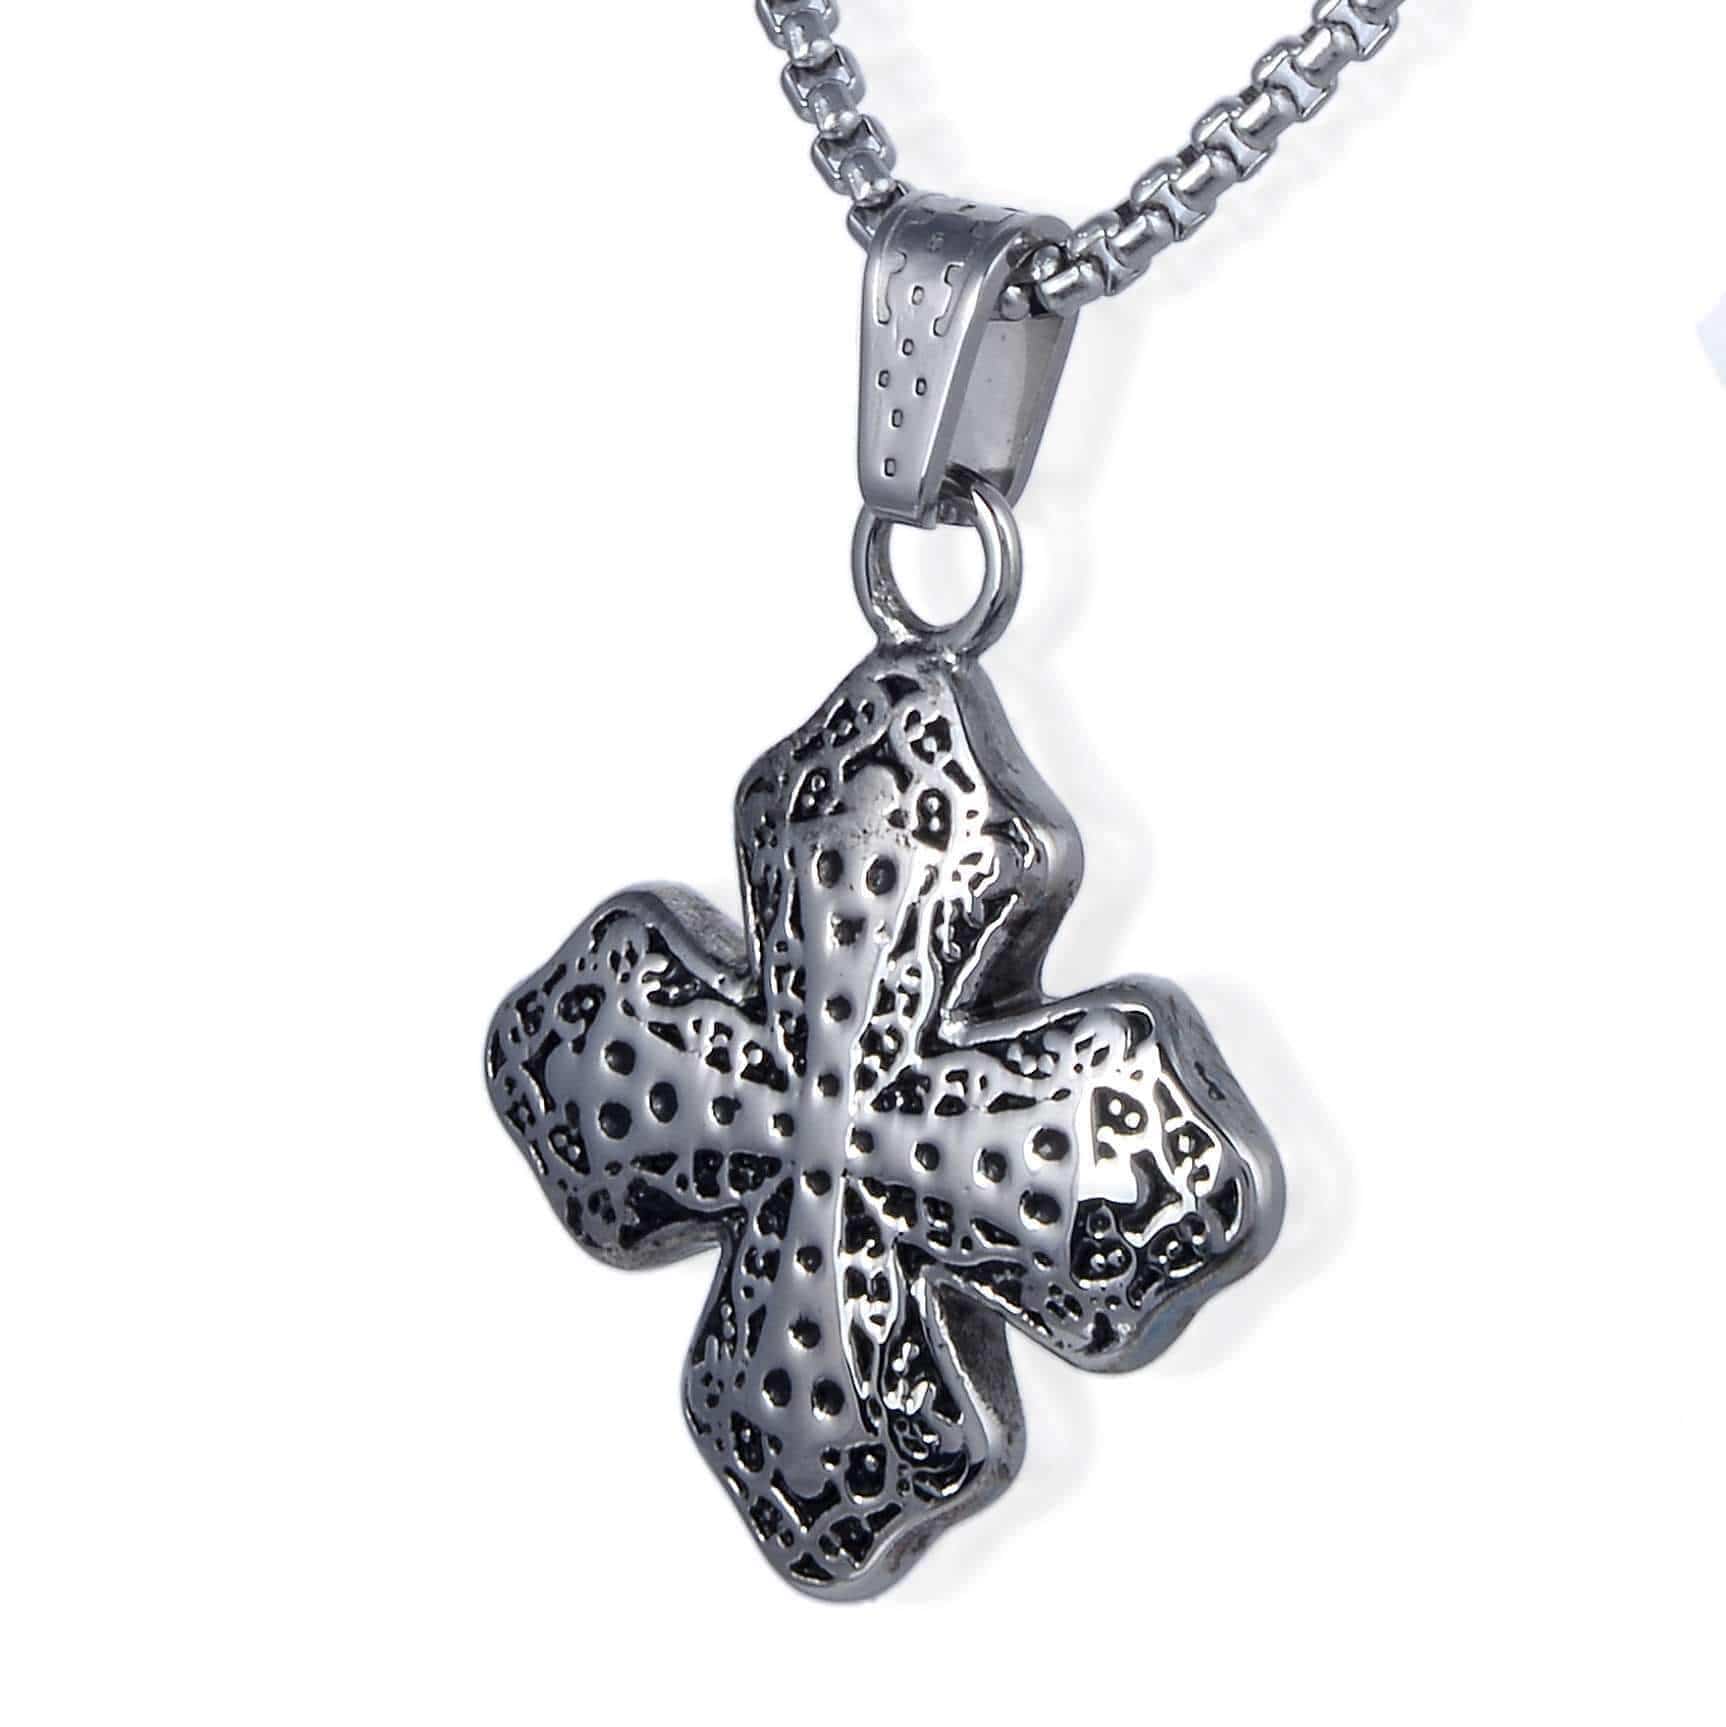 Kalifano Steel Hearts Jewelry Steel Hearts Etched Coptic Cross Necklace SHN120-84